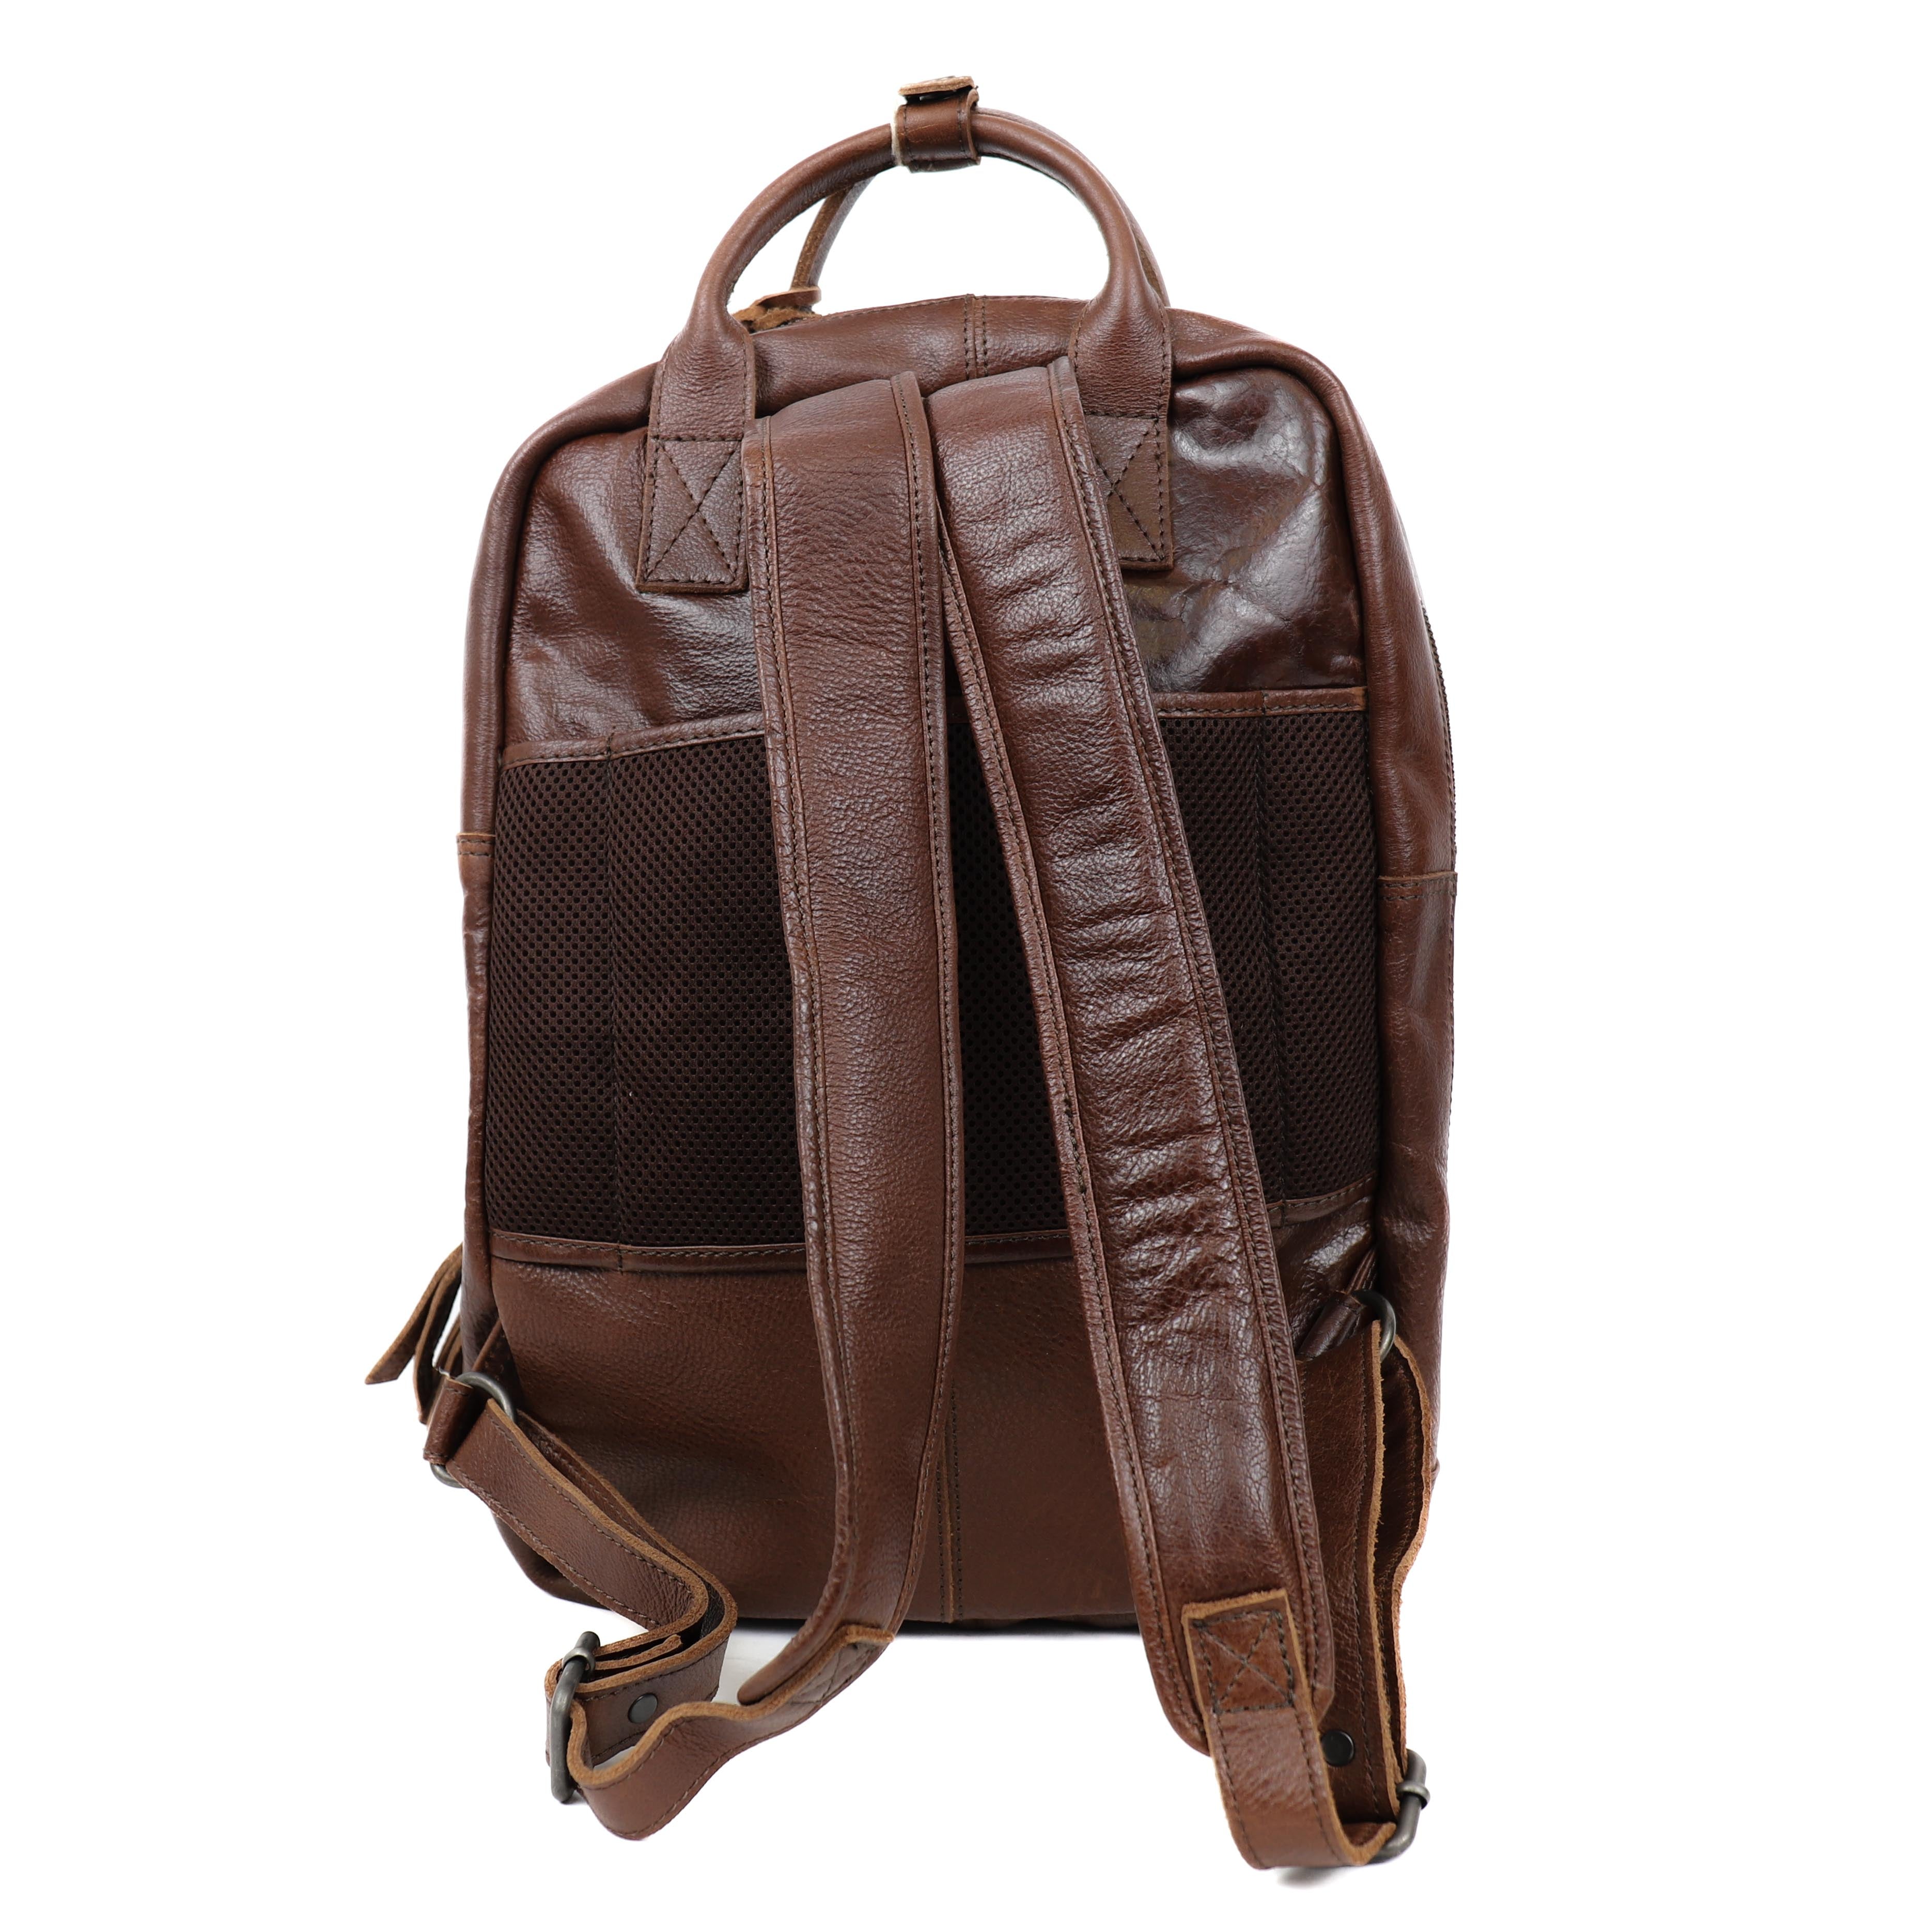 Backpack 'Anthony' brown/stripe